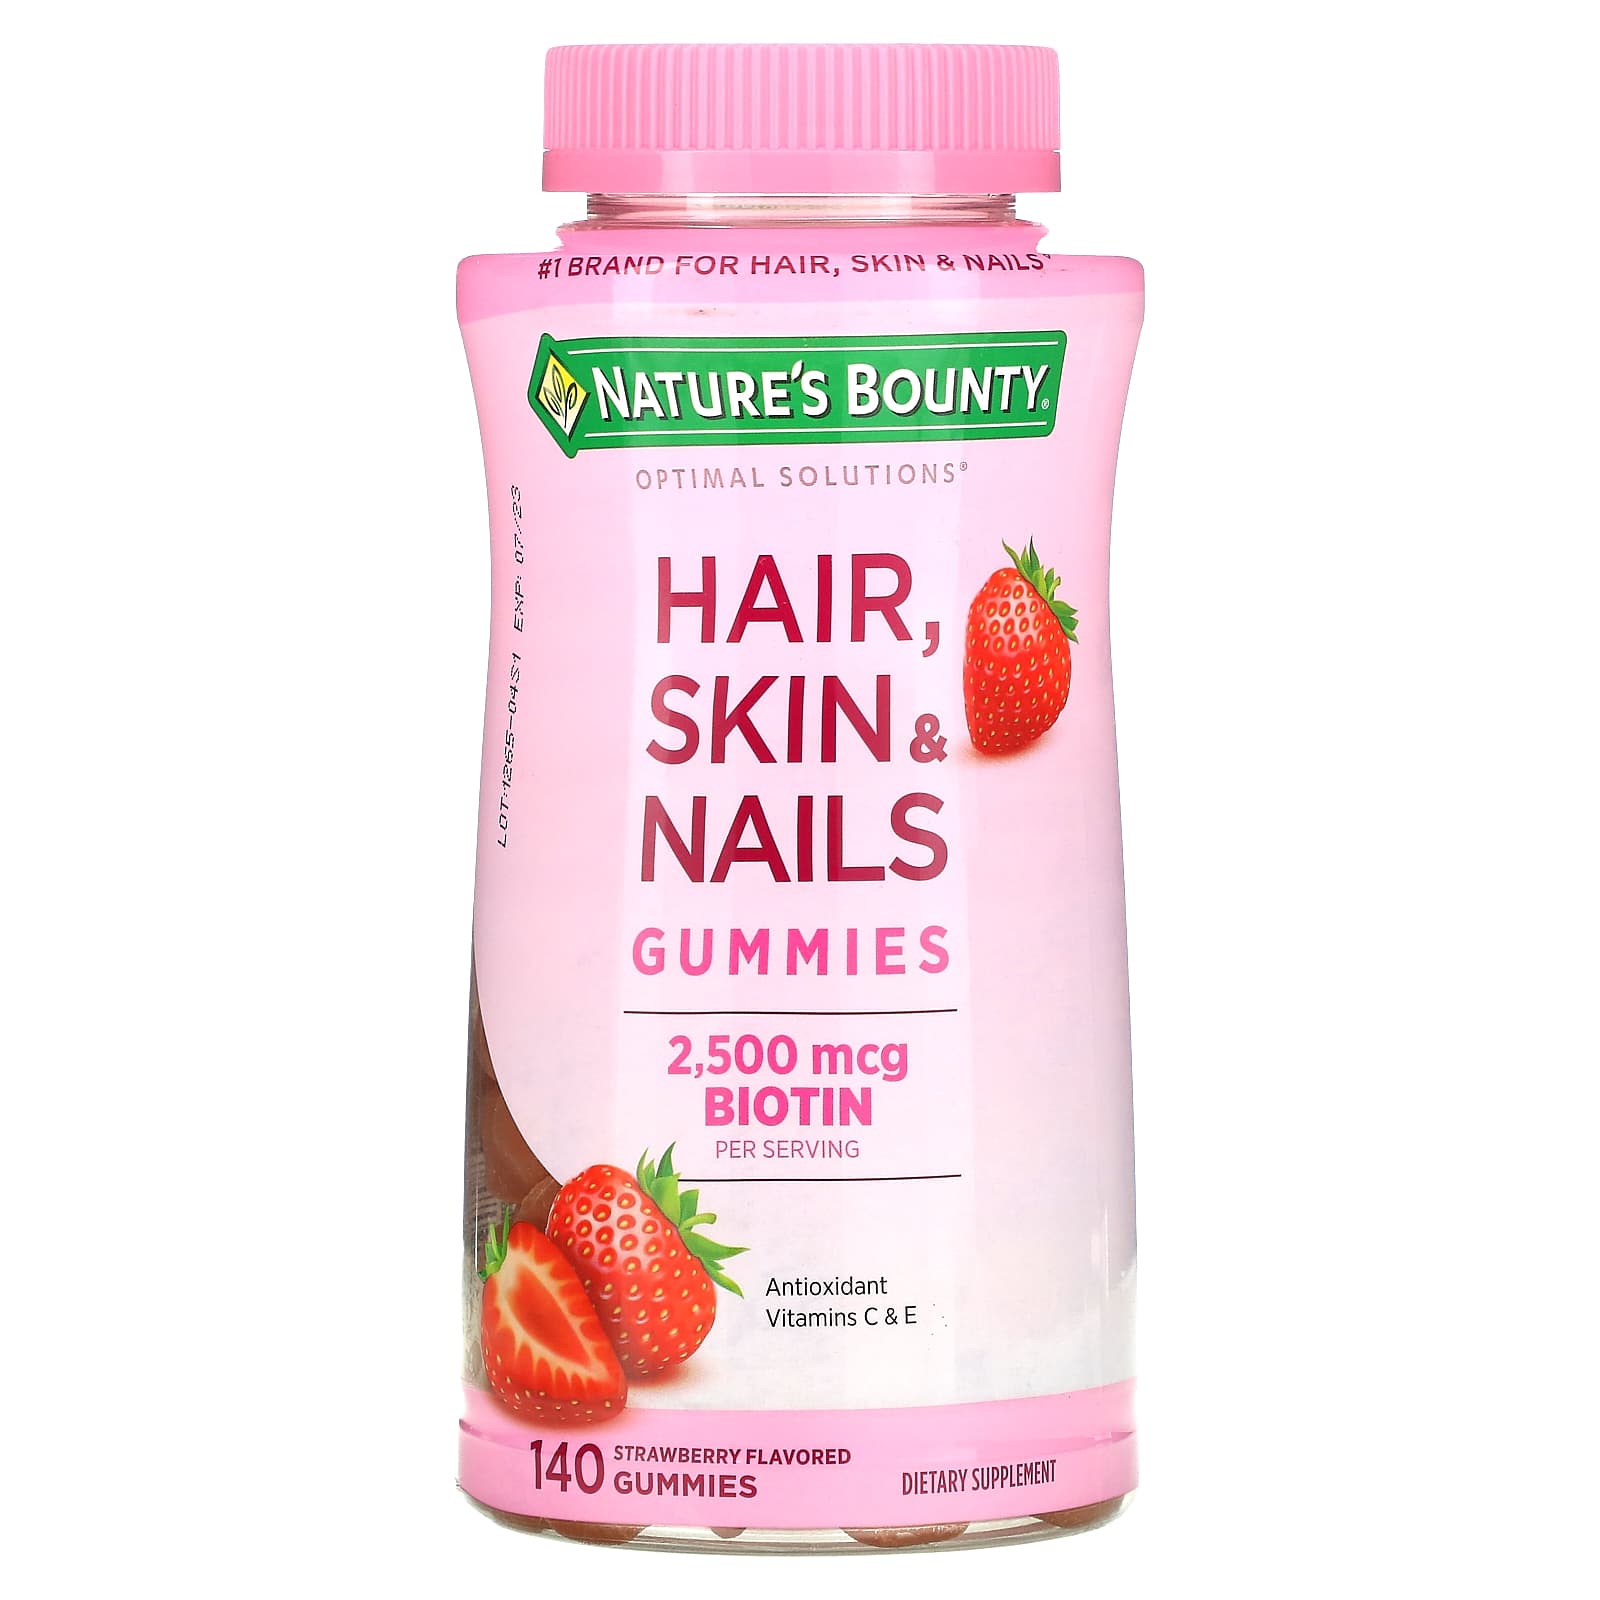 Nature's bounty hair skin and nails gummies with 2500 mcg biotin to promote healthy appearance - 140 Gummies Strawbery Flavored